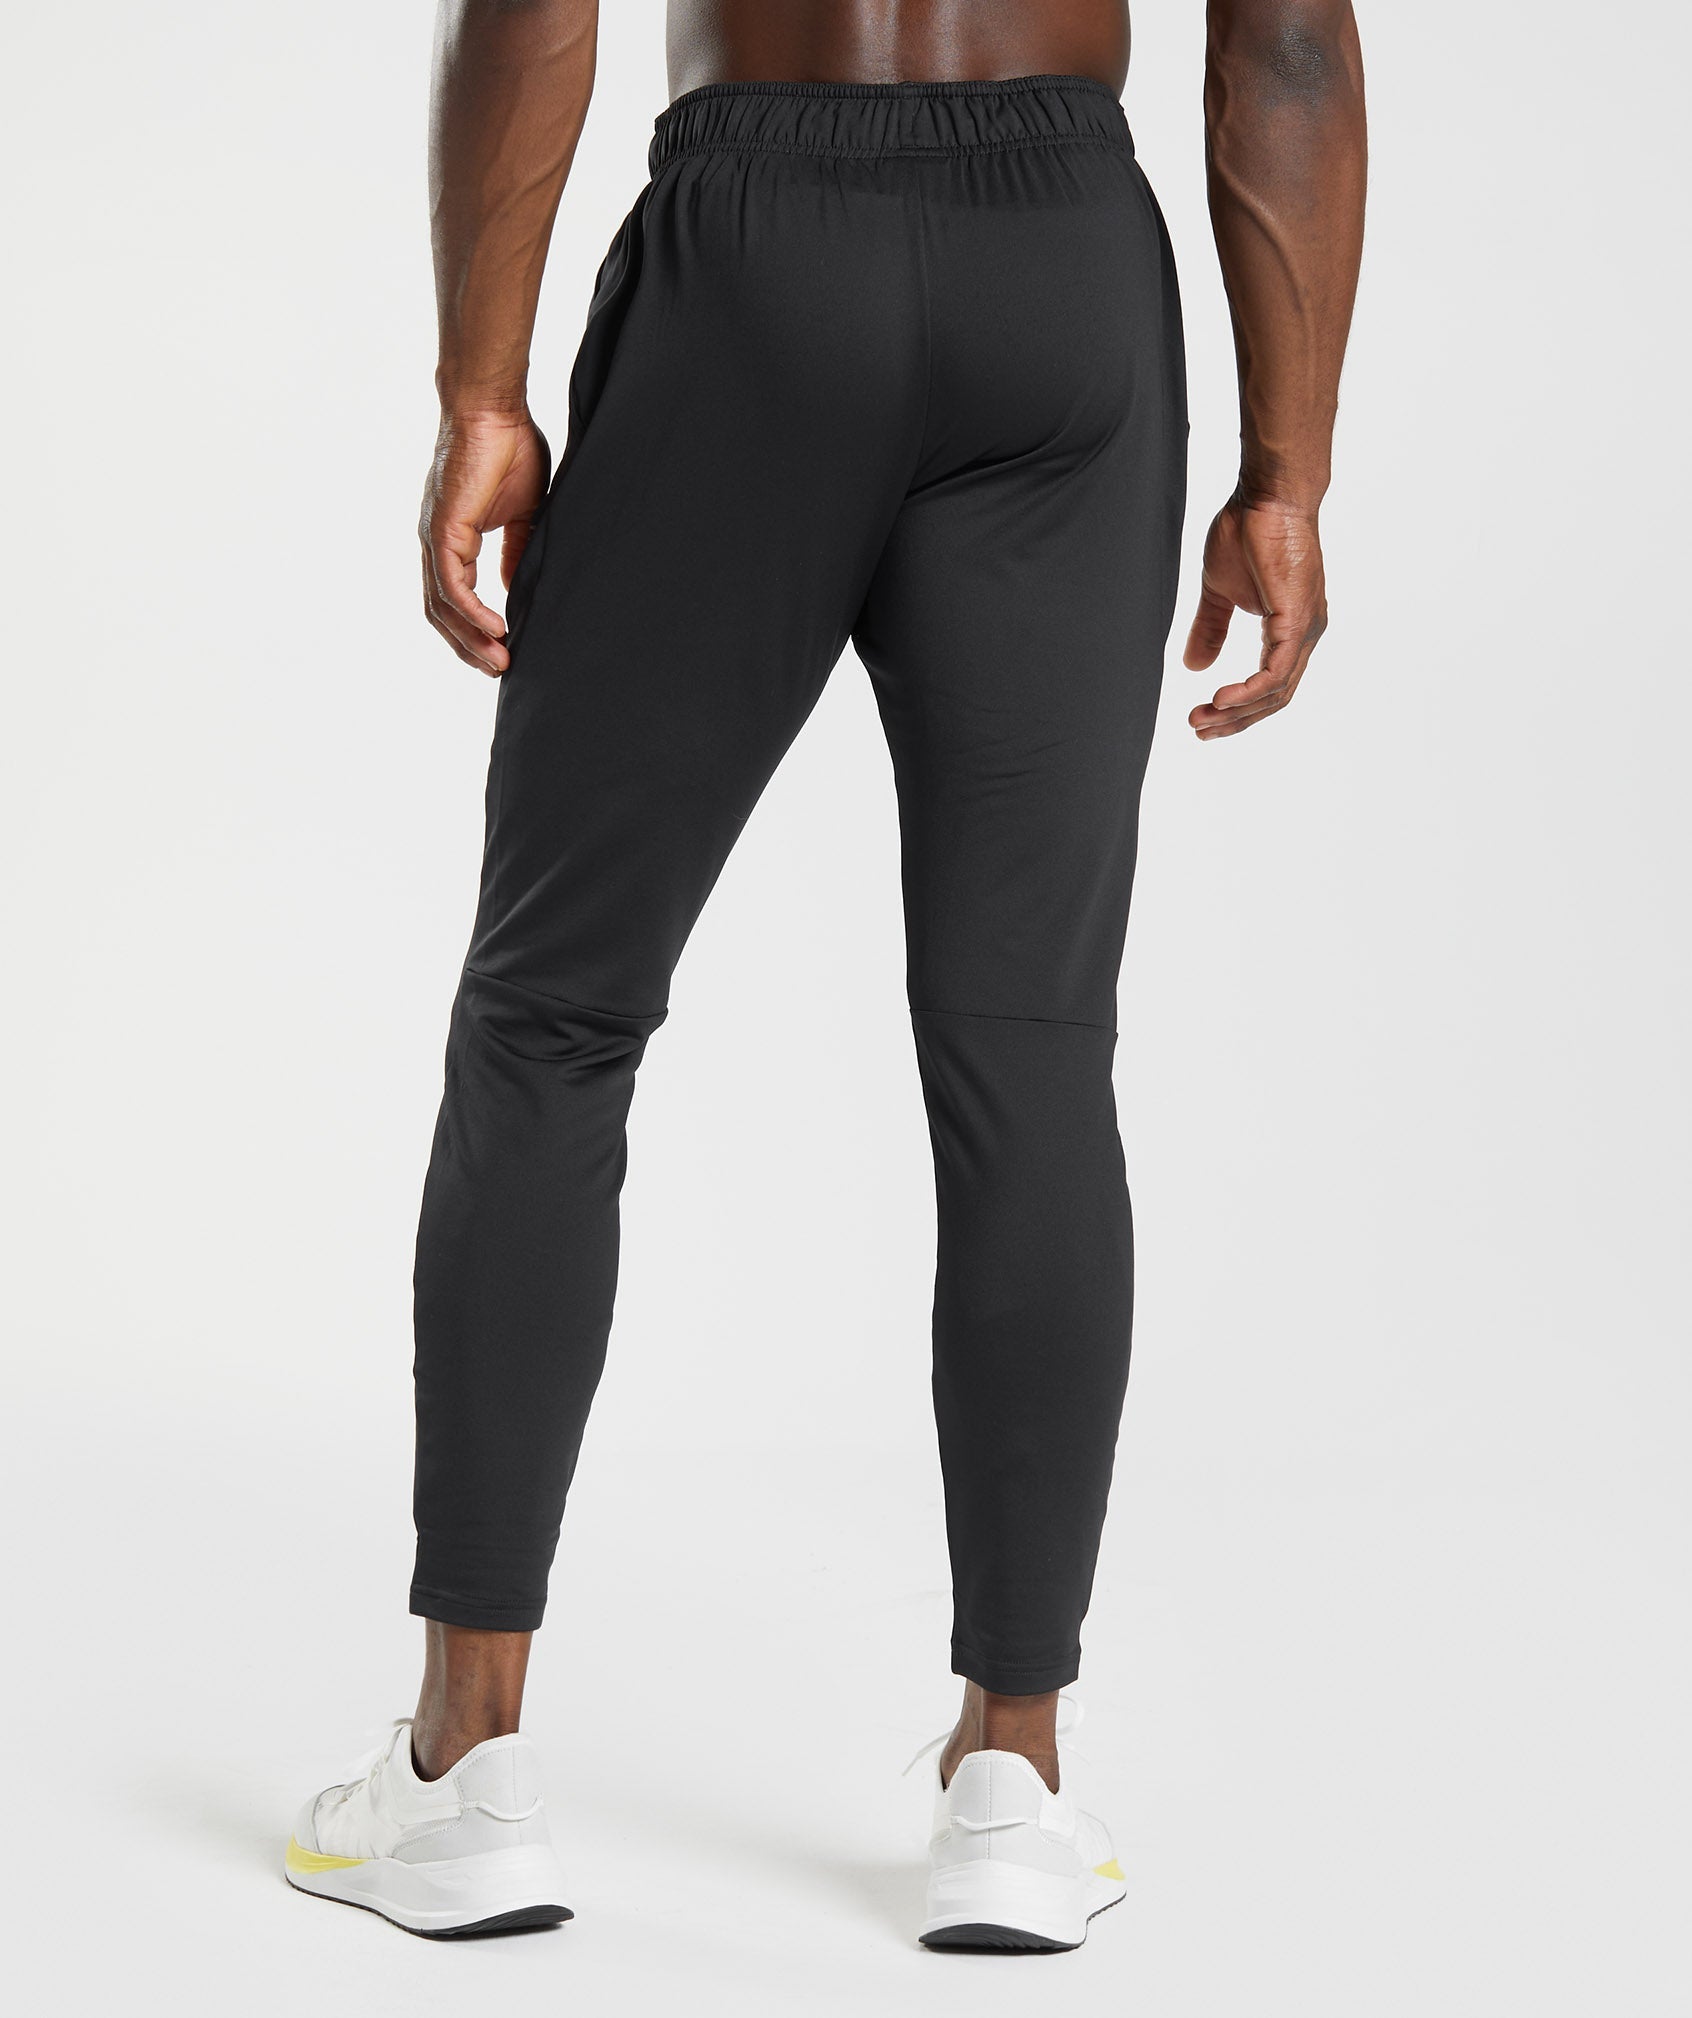 Gymshark Navy Blue Apex Leggings Size M - $42 (35% Off Retail) - From  Kimberley